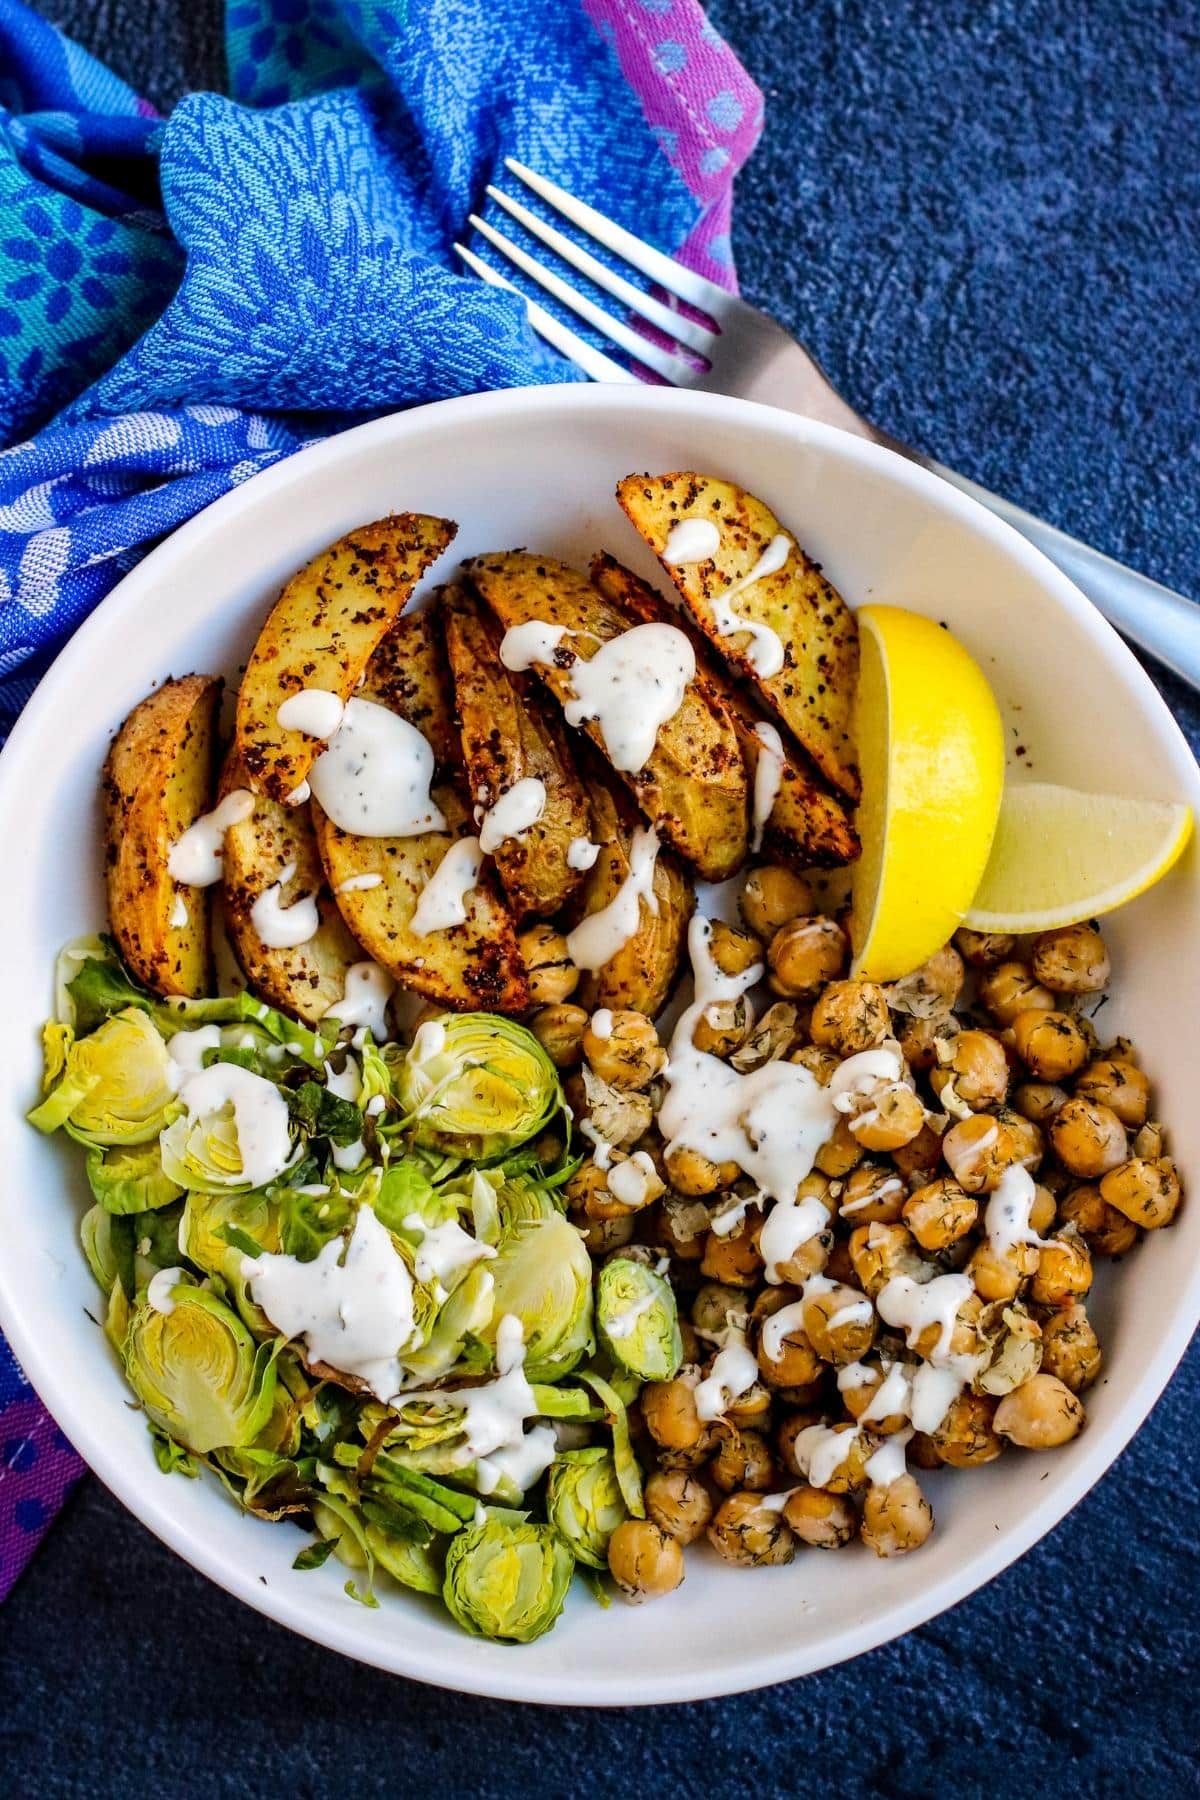 Chickpea bowl drizzled with sunflower sour cream sauce.